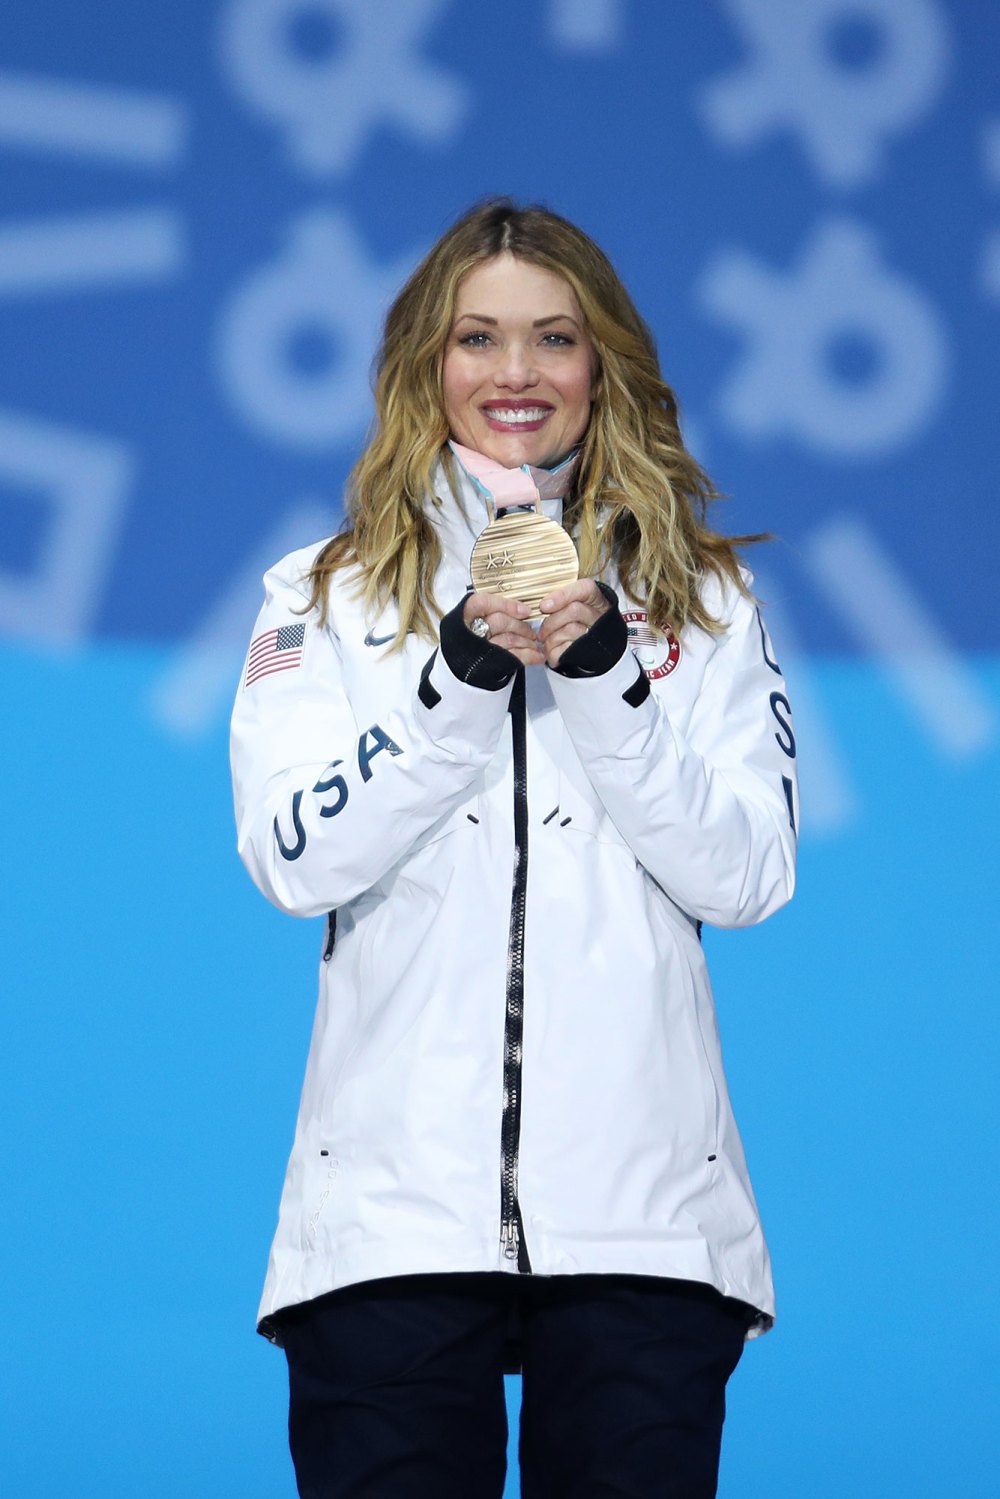 Amy Purdy Faces Loss of Her Kidney or Her Leg: ‘I’m More Scared Than I’ve Ever Been’